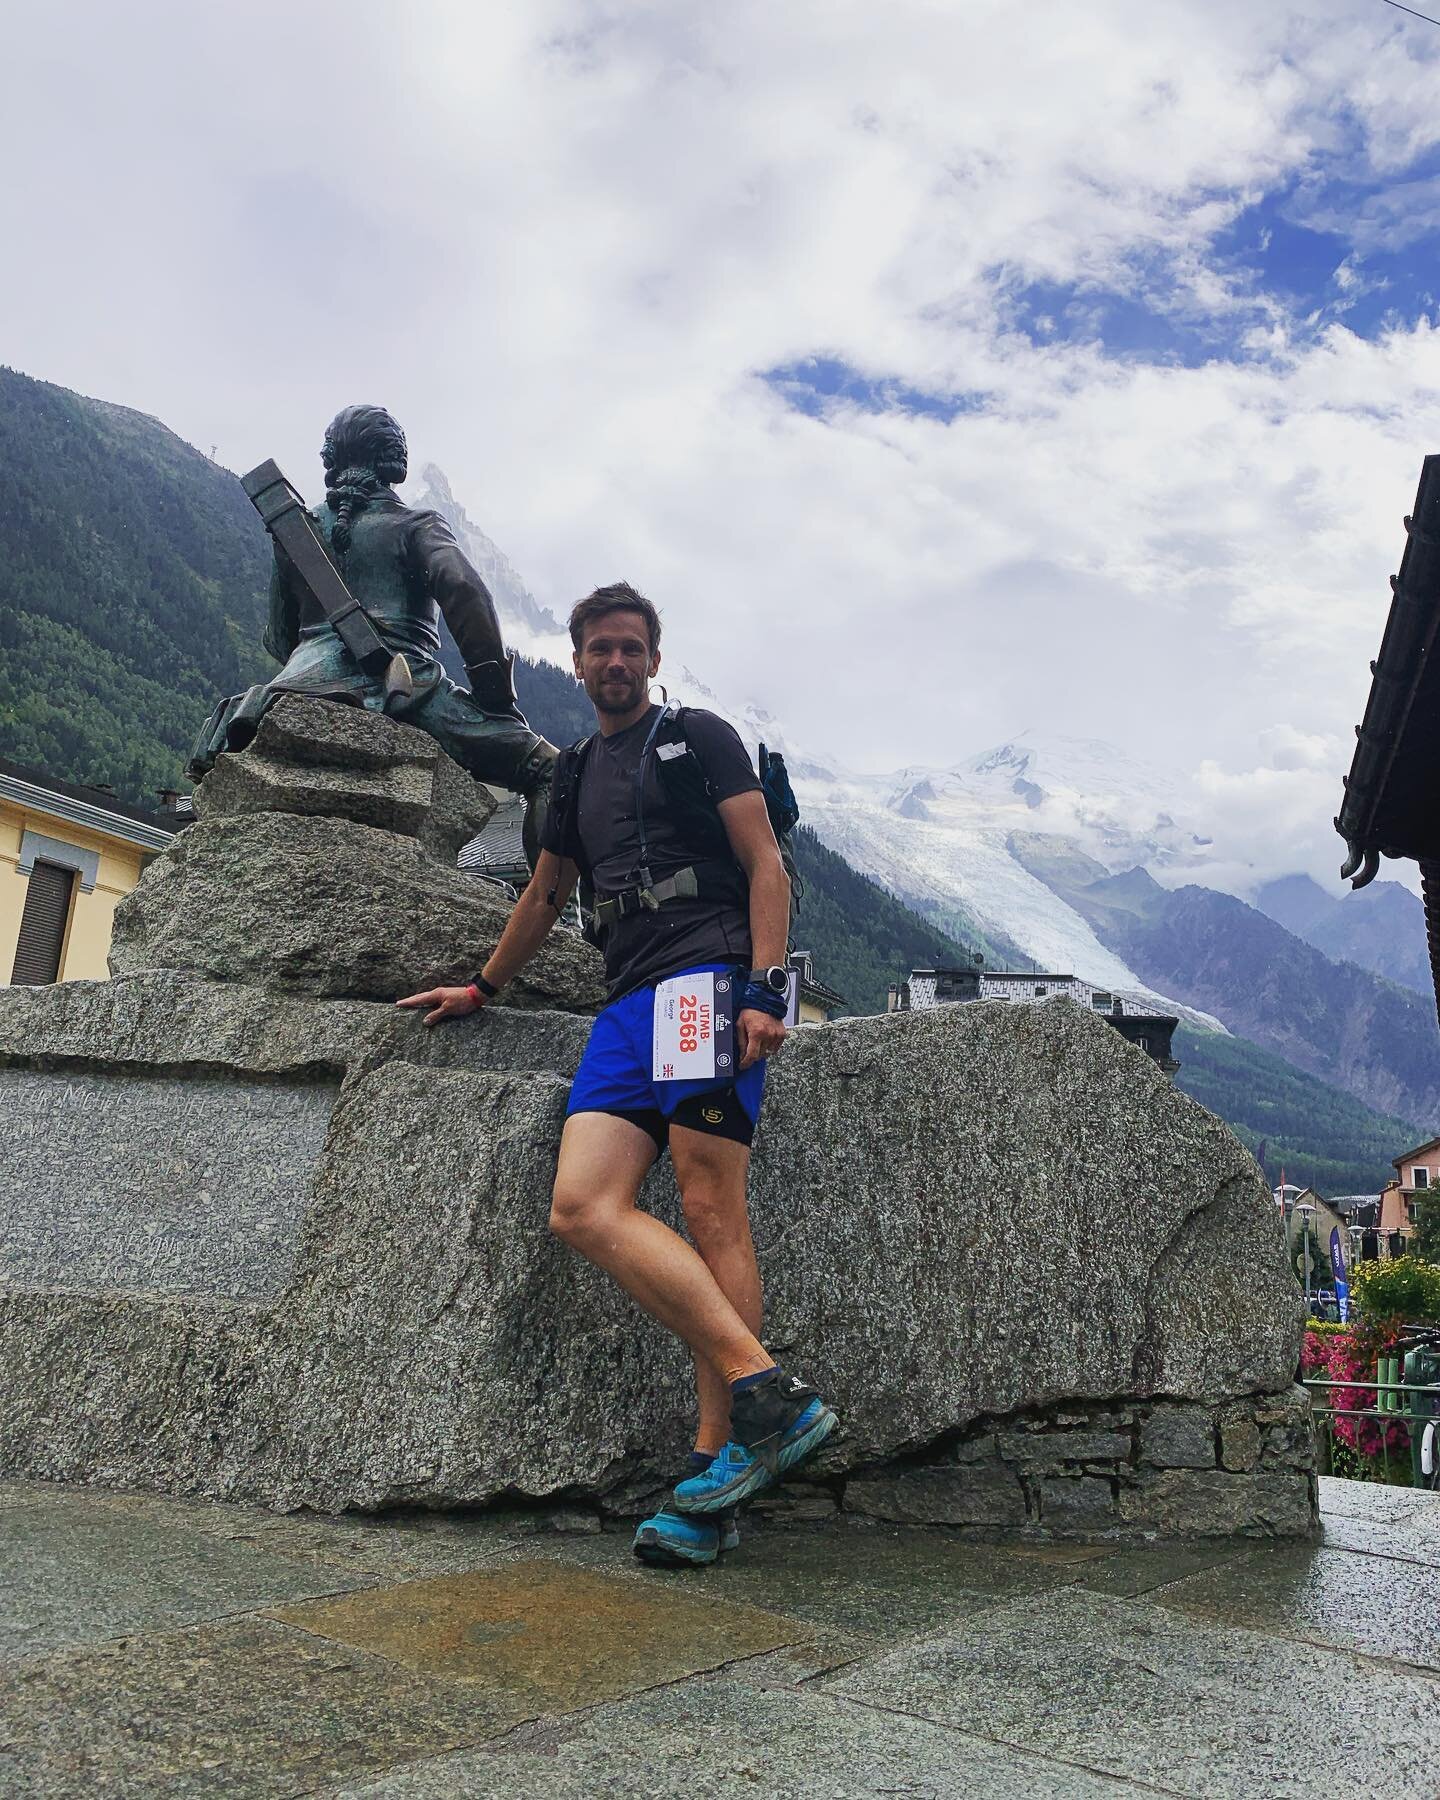 ⏰ Seven years later and another @utmbmontblanc completed. 

Like I said, I had forgotten how hard it was and having done the Tor Des Geants (350km, 31,000m altitude gain) last year I thought the UTMB would have been a &lsquo;walk in the park&rsquo; (